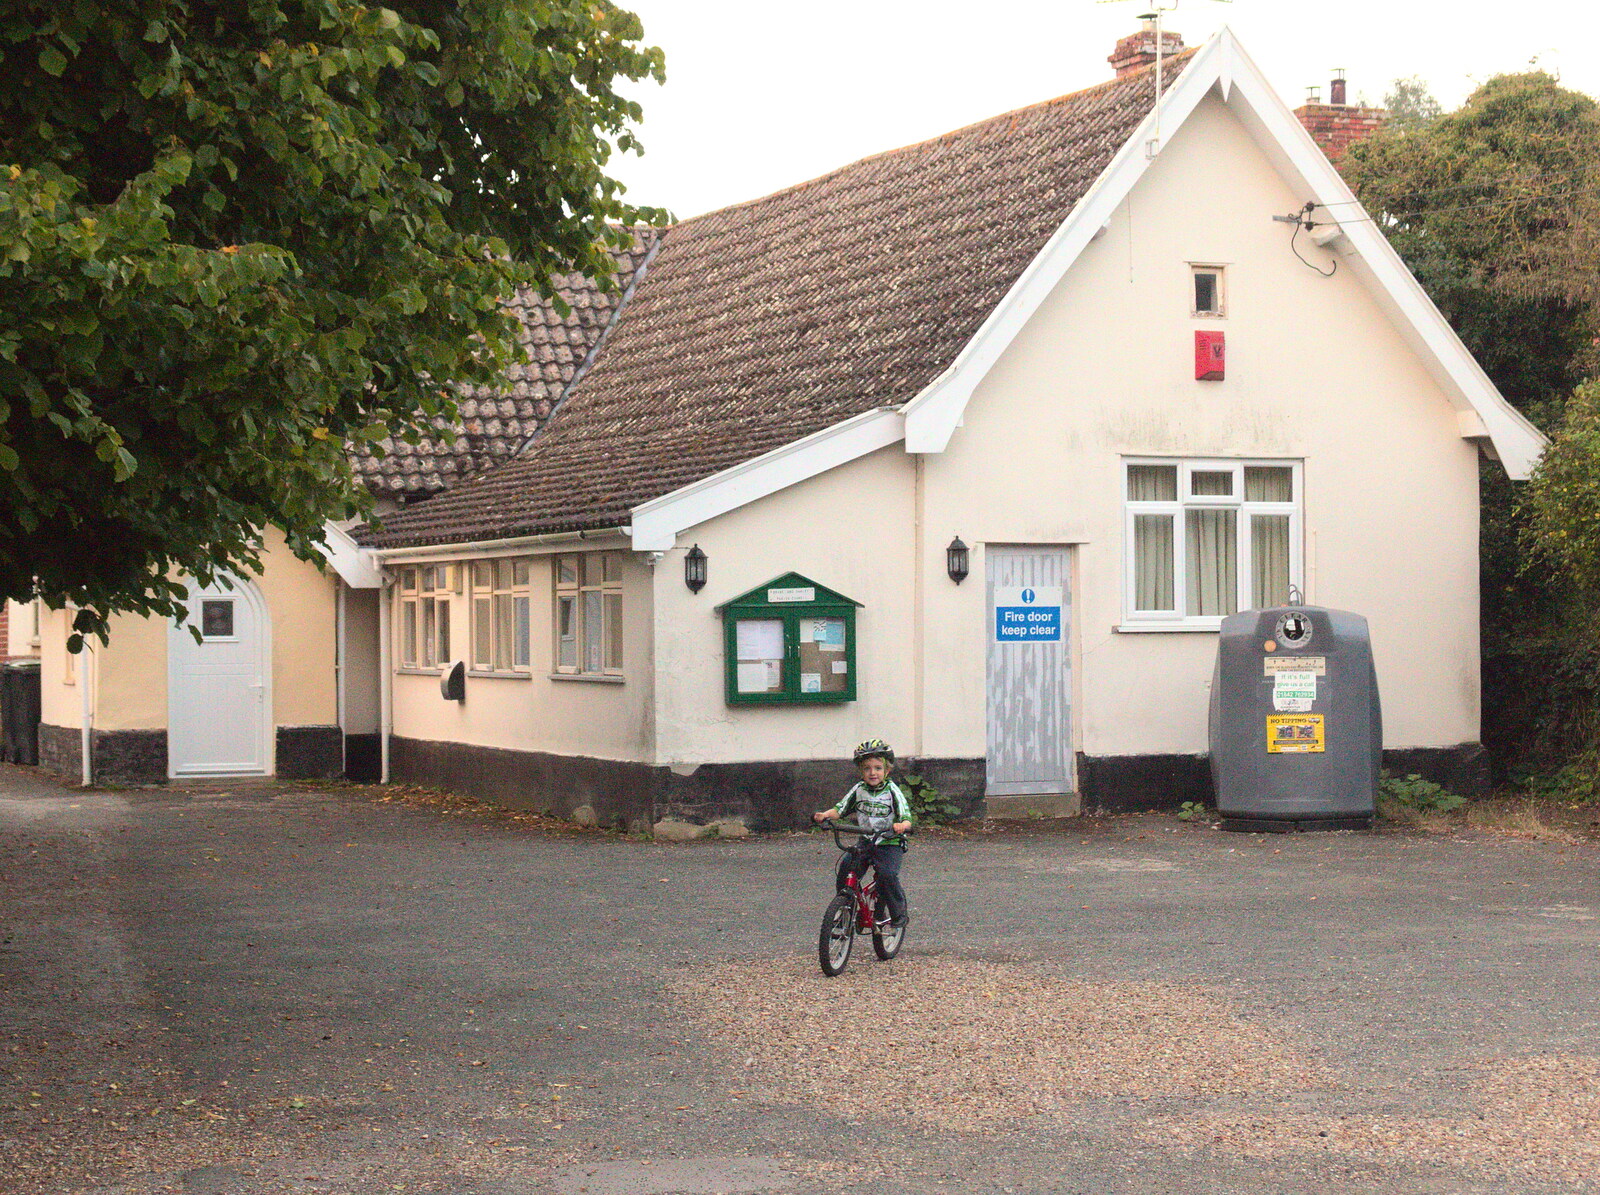 Fred pootles around the village hall car park from Bike Rides and the BSCC at the Railway, Mellis and Brome, Suffolk - 18th September 2014